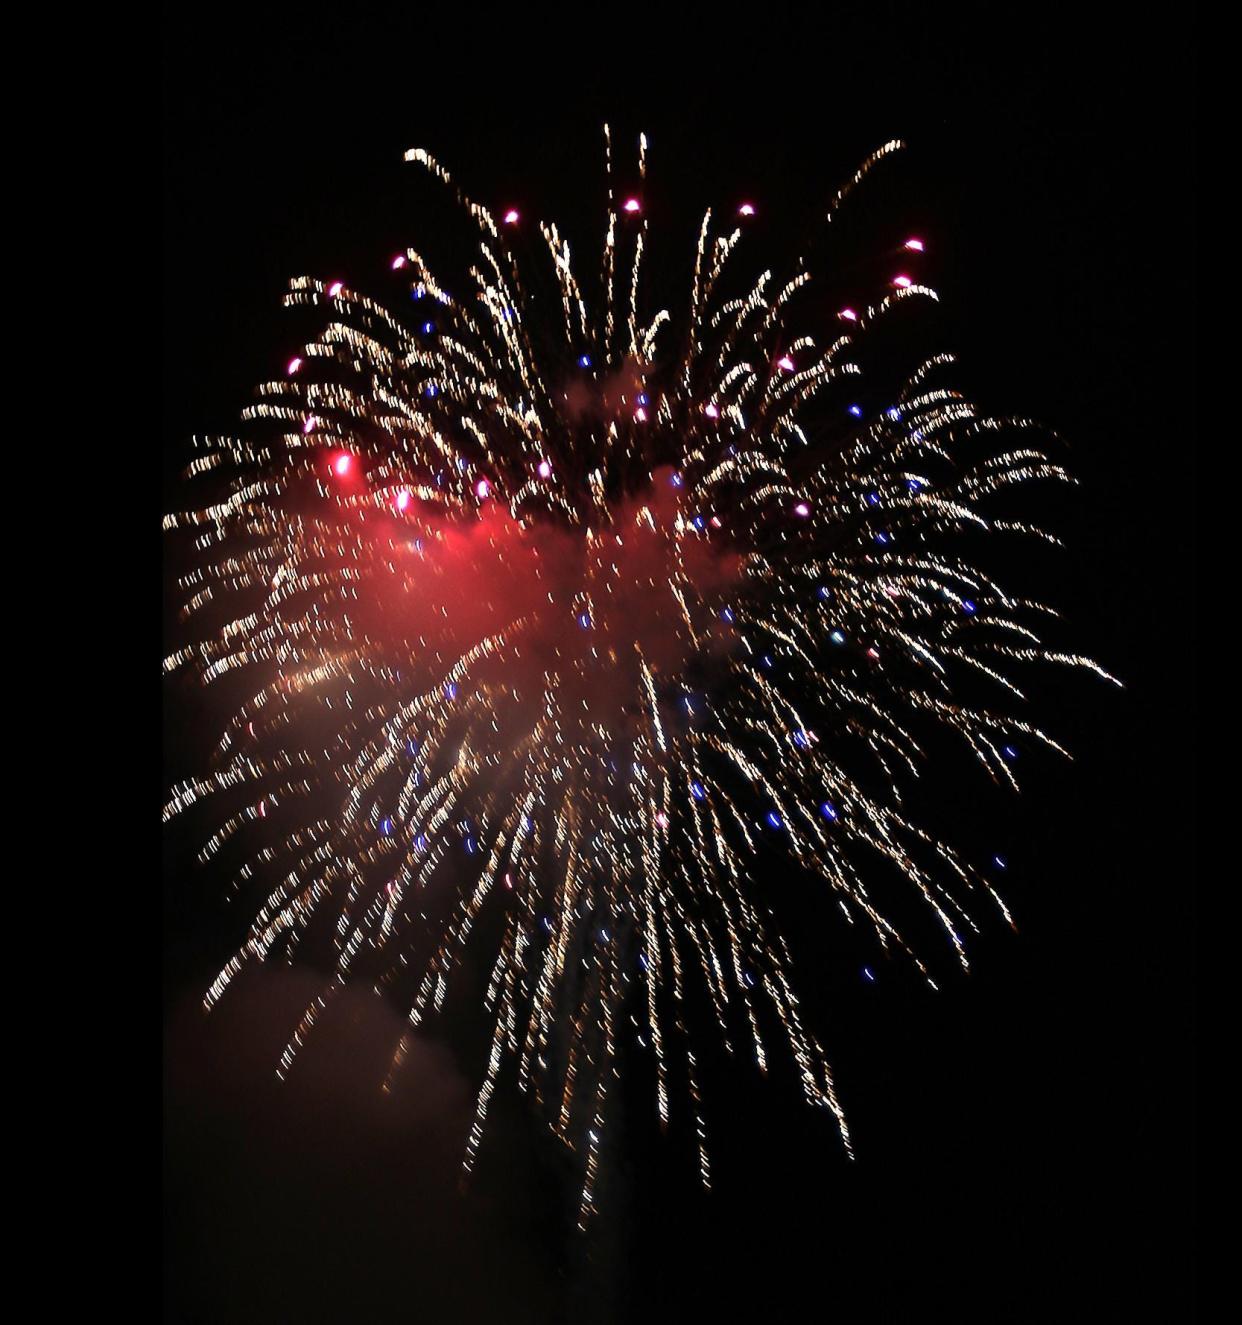 Fireworks are planned for the Sparks of Giving celebration on July 16 along state Route 212 from Bolivar to Zoarville.